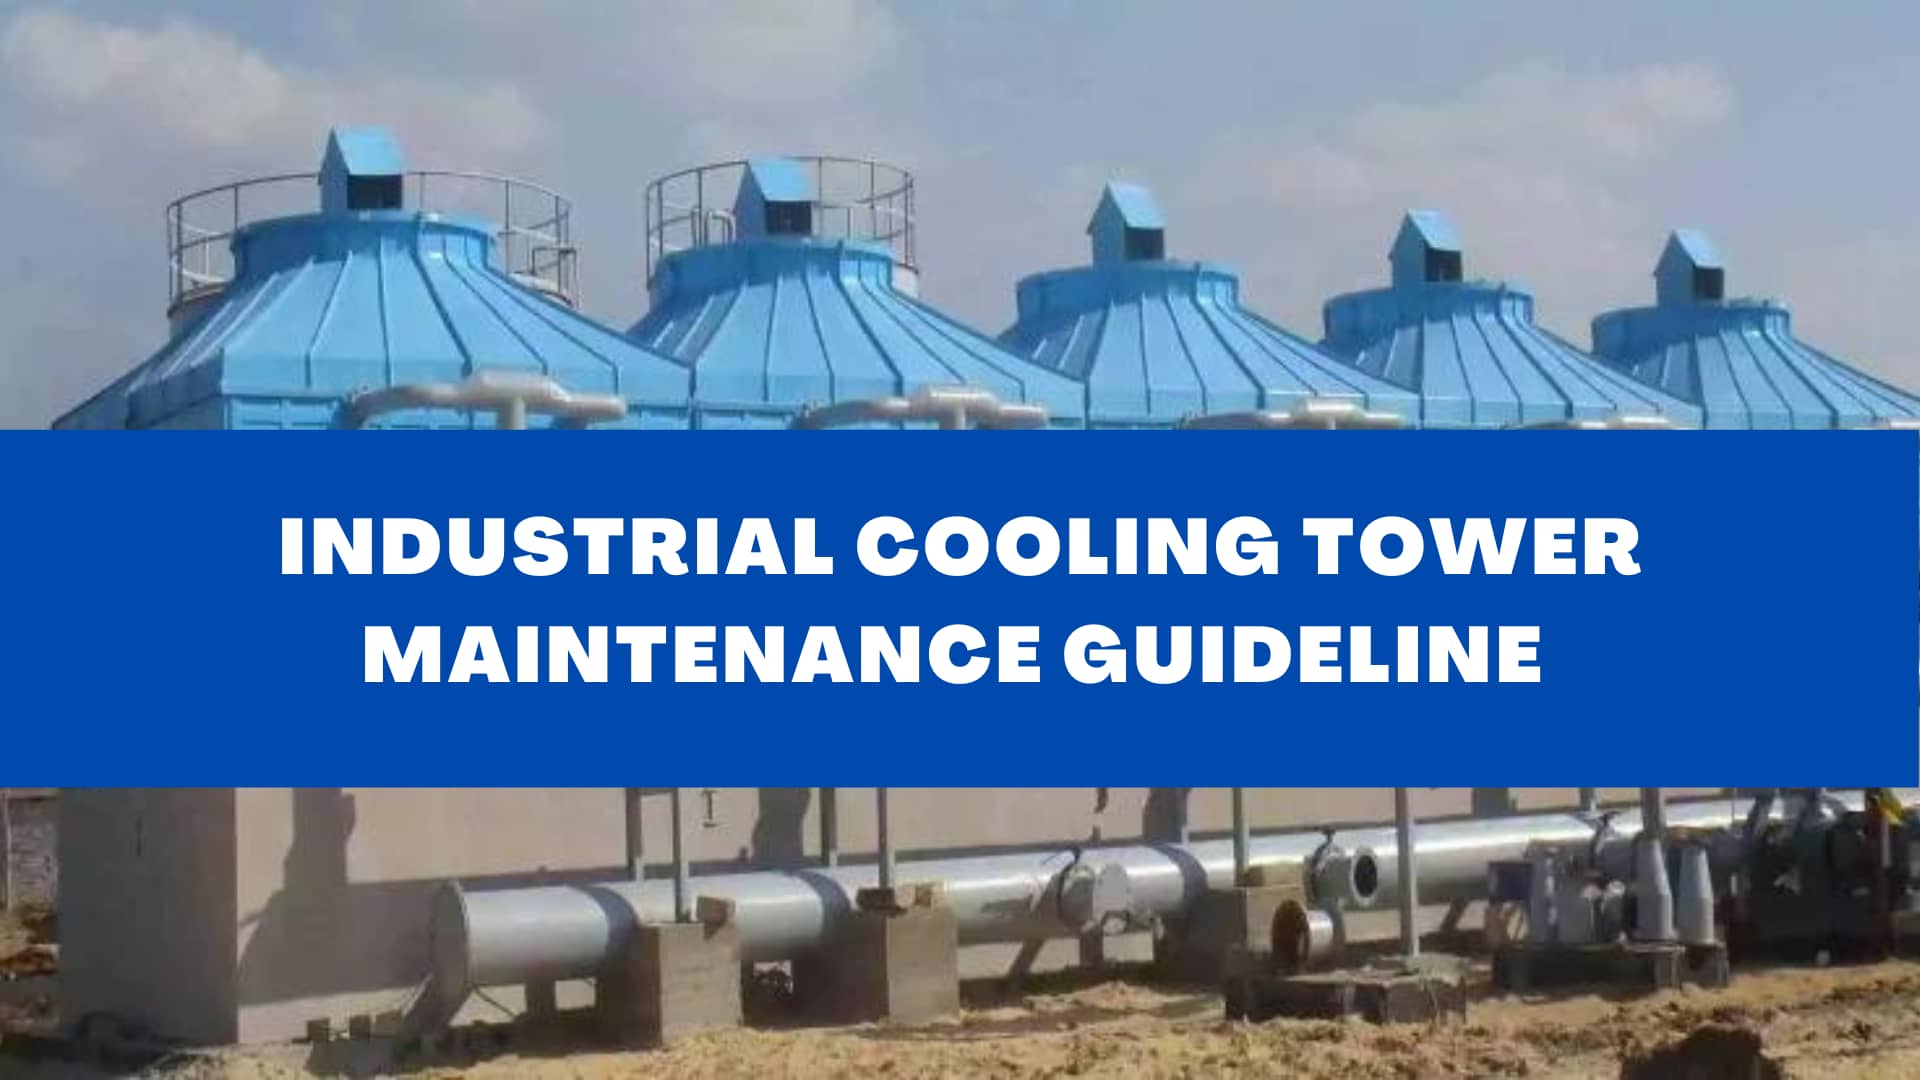 Cooling tower maintenance guideline